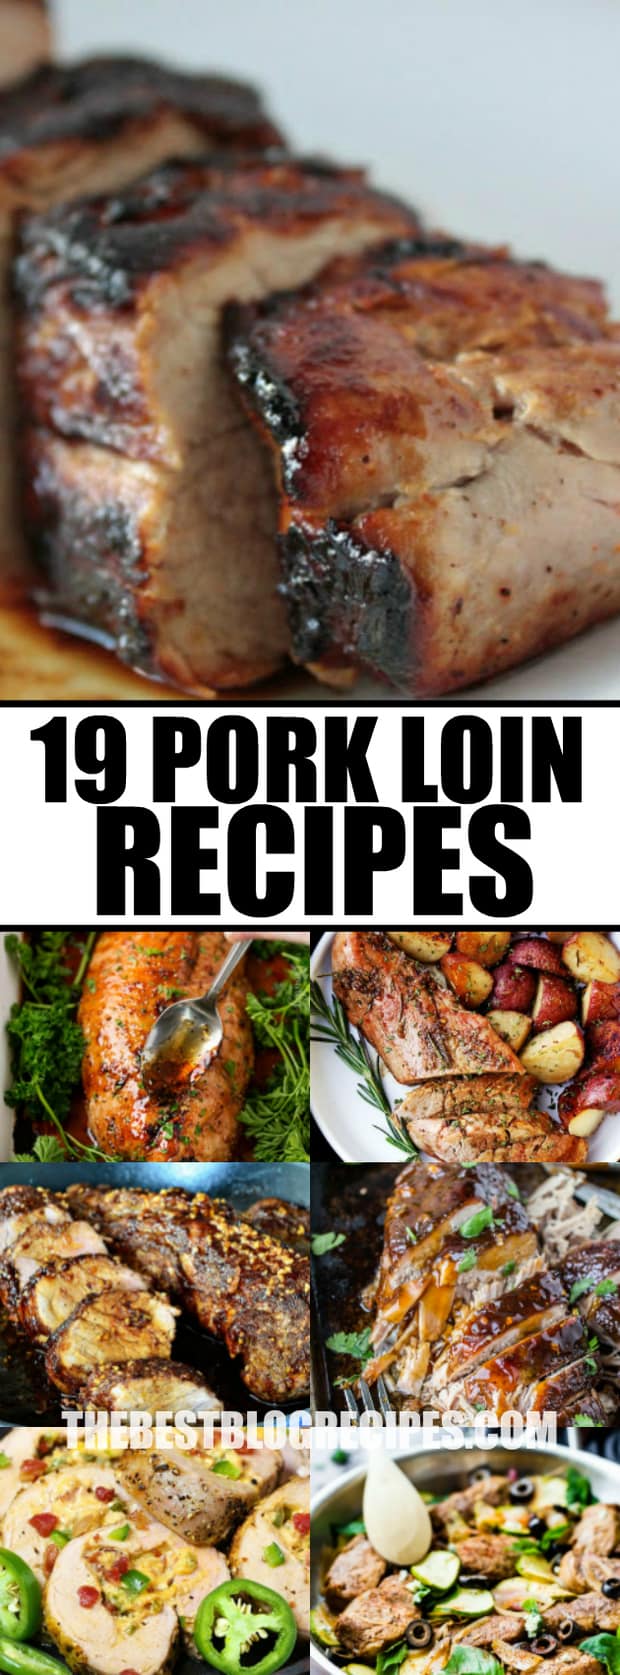 19 PORK LOIN RECIPES FOR EVERY OCCASION